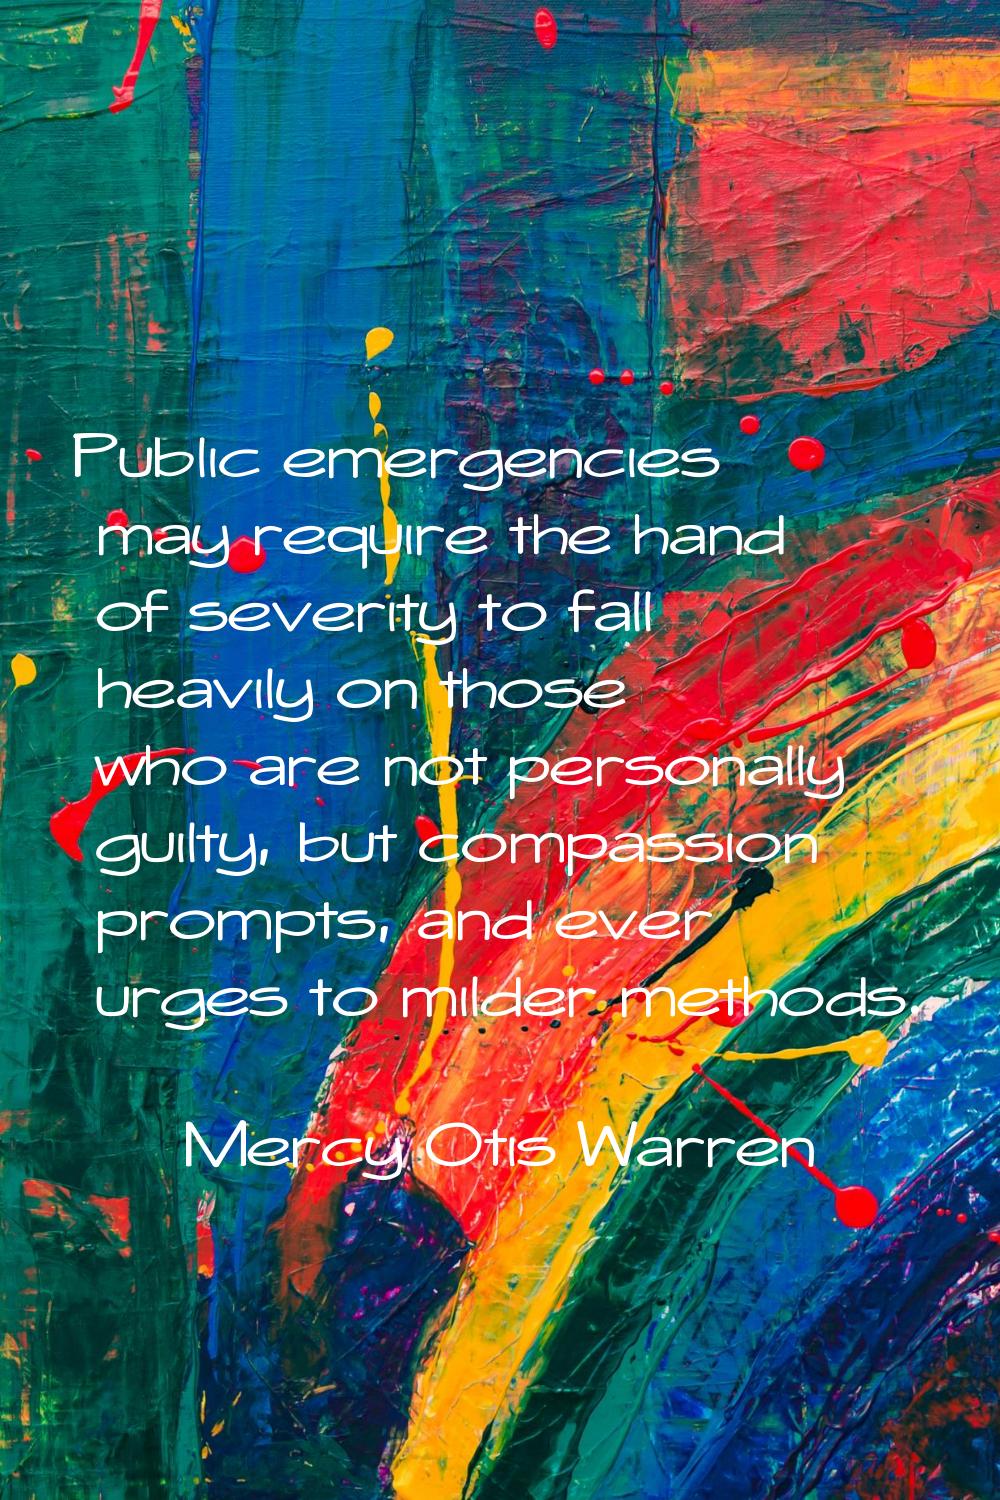 Public emergencies may require the hand of severity to fall heavily on those who are not personally